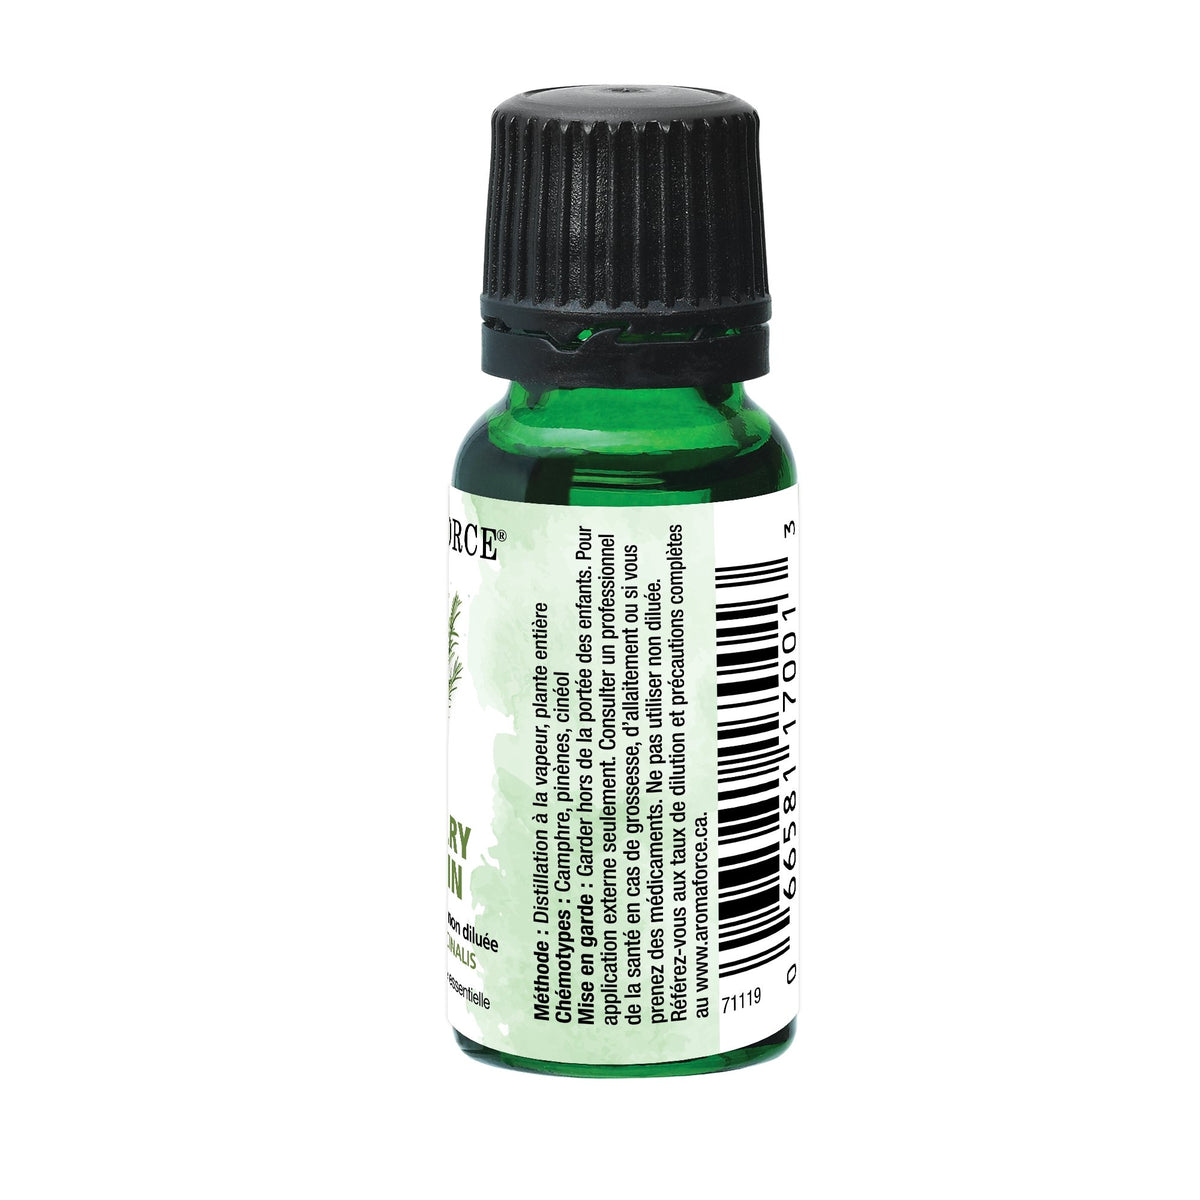 Aromaforce Rosemary Essential Oil 15mL - A.Vogel Canada